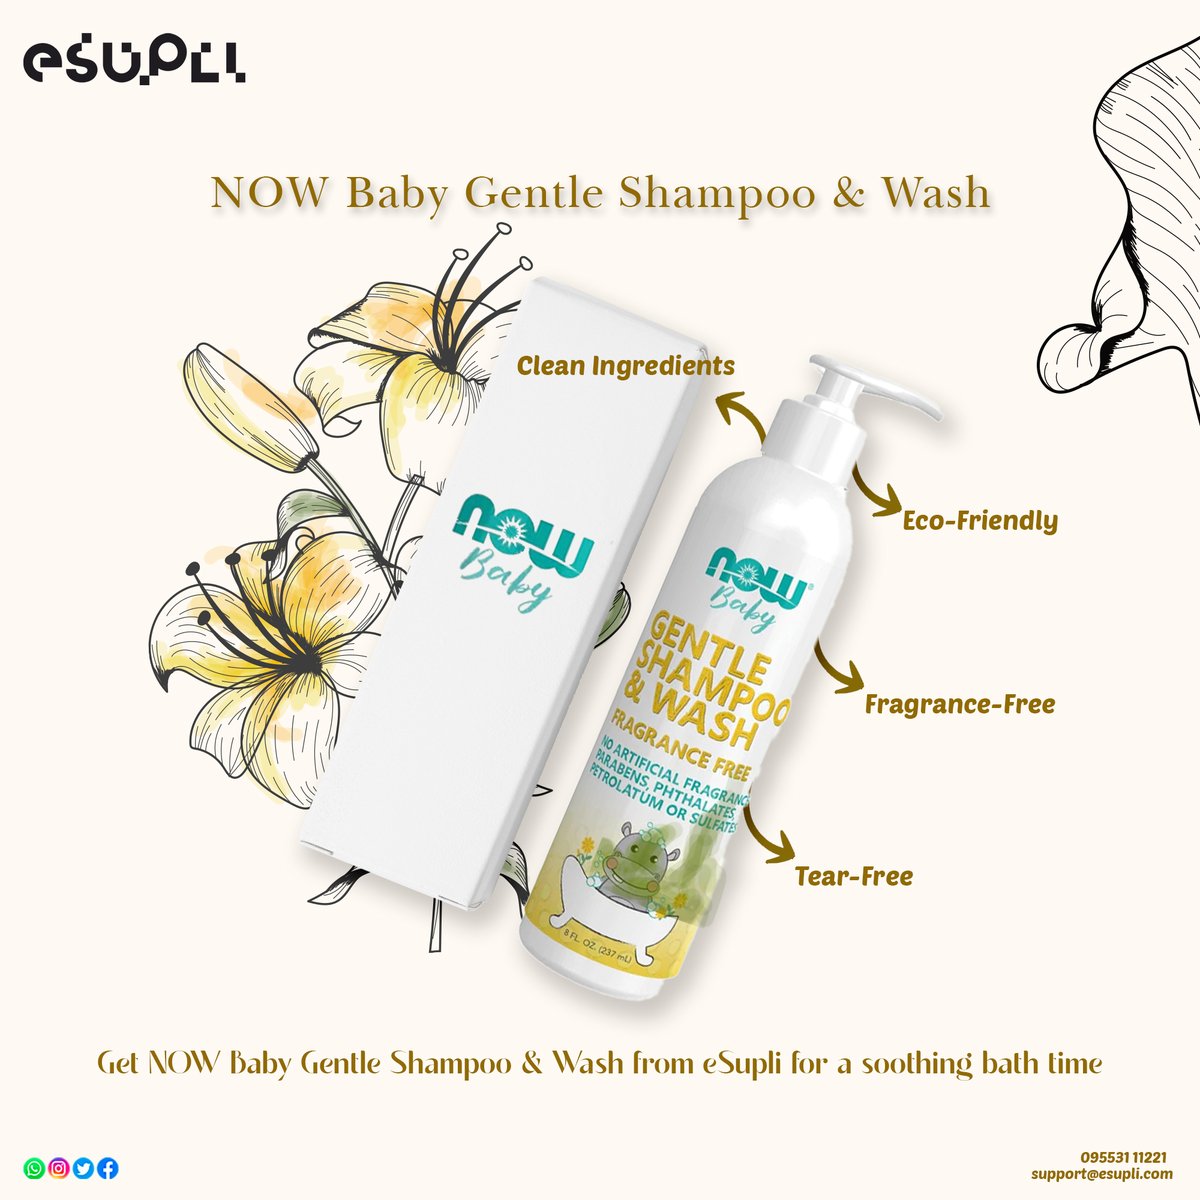 Pure care for your little one's delicate skin. Get NOW Baby Gentle Shampoo & Wash
Buy Now: esupli.com/products/now-b…
.
.
.
#esupli #NOWBaby #babyshampoo #GentleCare #fragrancefree #cleaningredients #parabenfree #PhthalateFree #petrolatumfree #sulfatefree #babyskincare #NaturalBaby